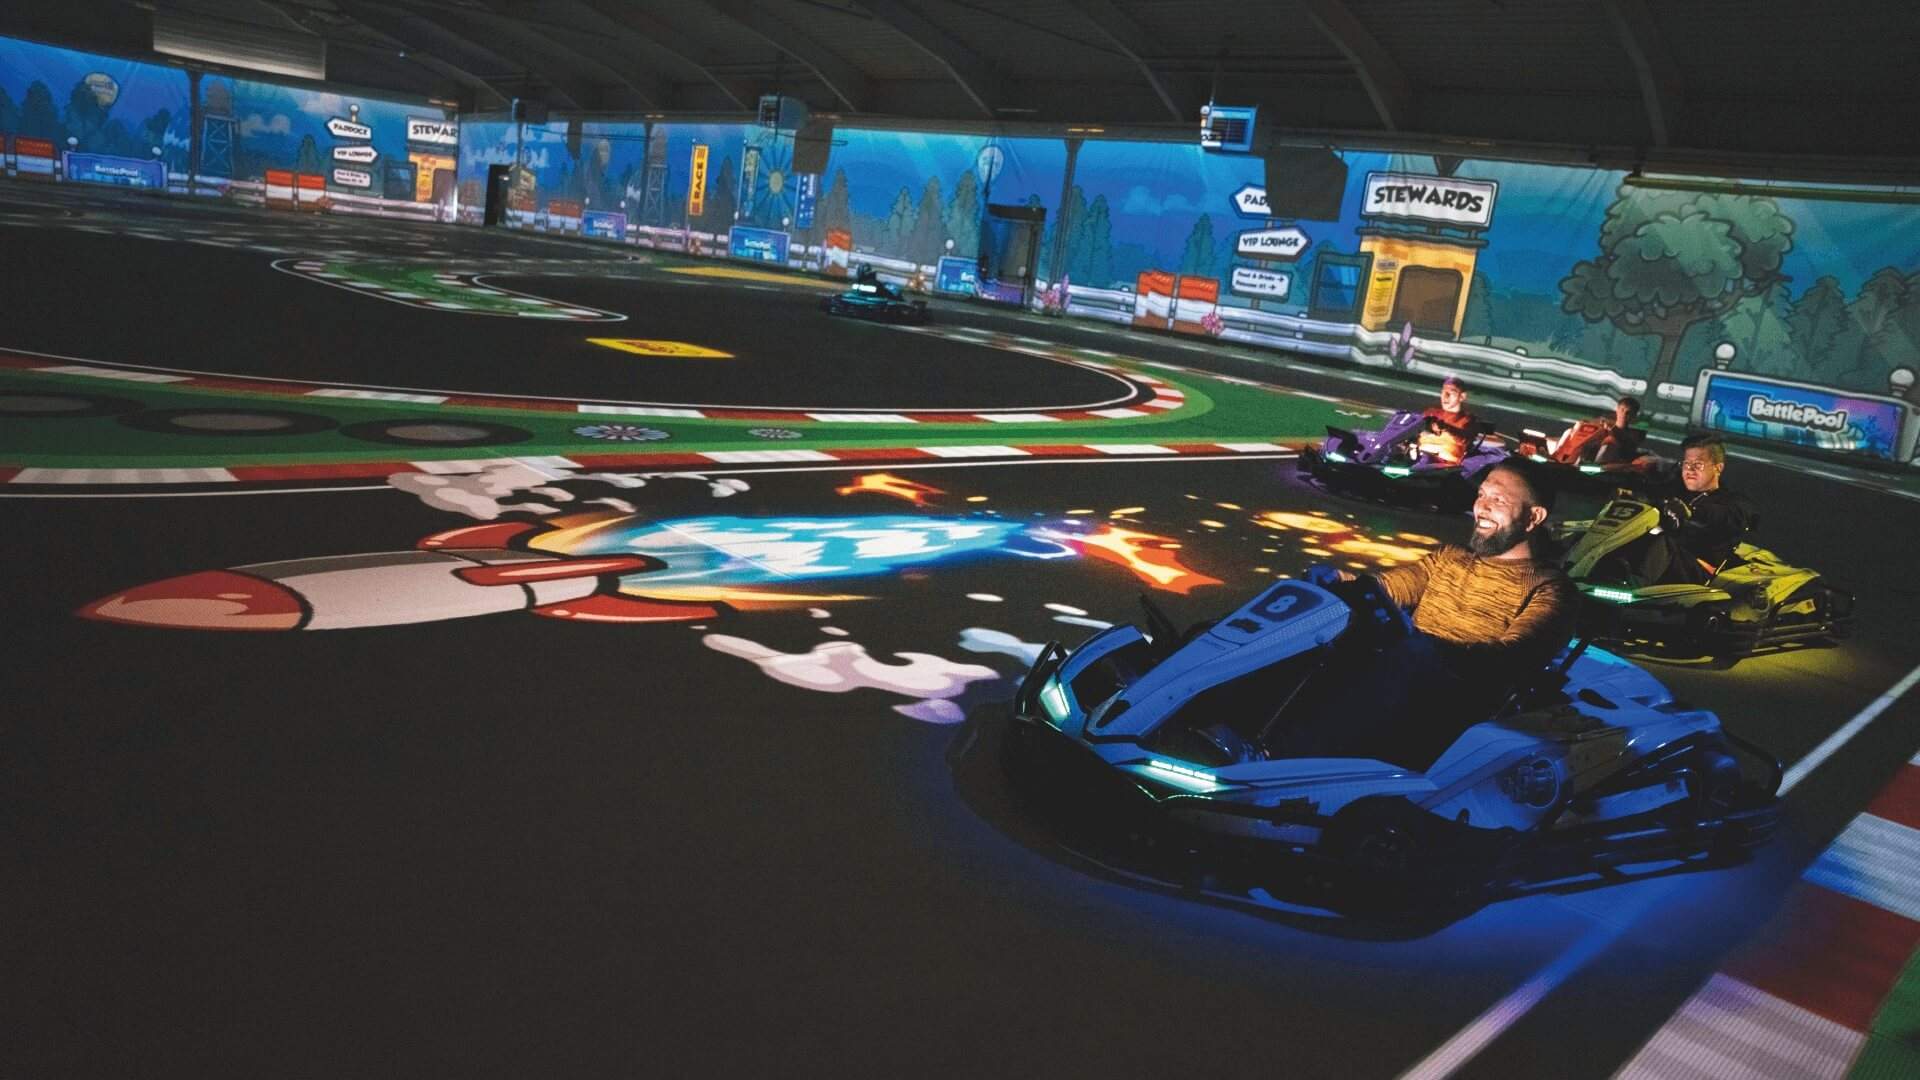 BattleKart Melbourne - augmented reality go-kart racing in Melbourne.